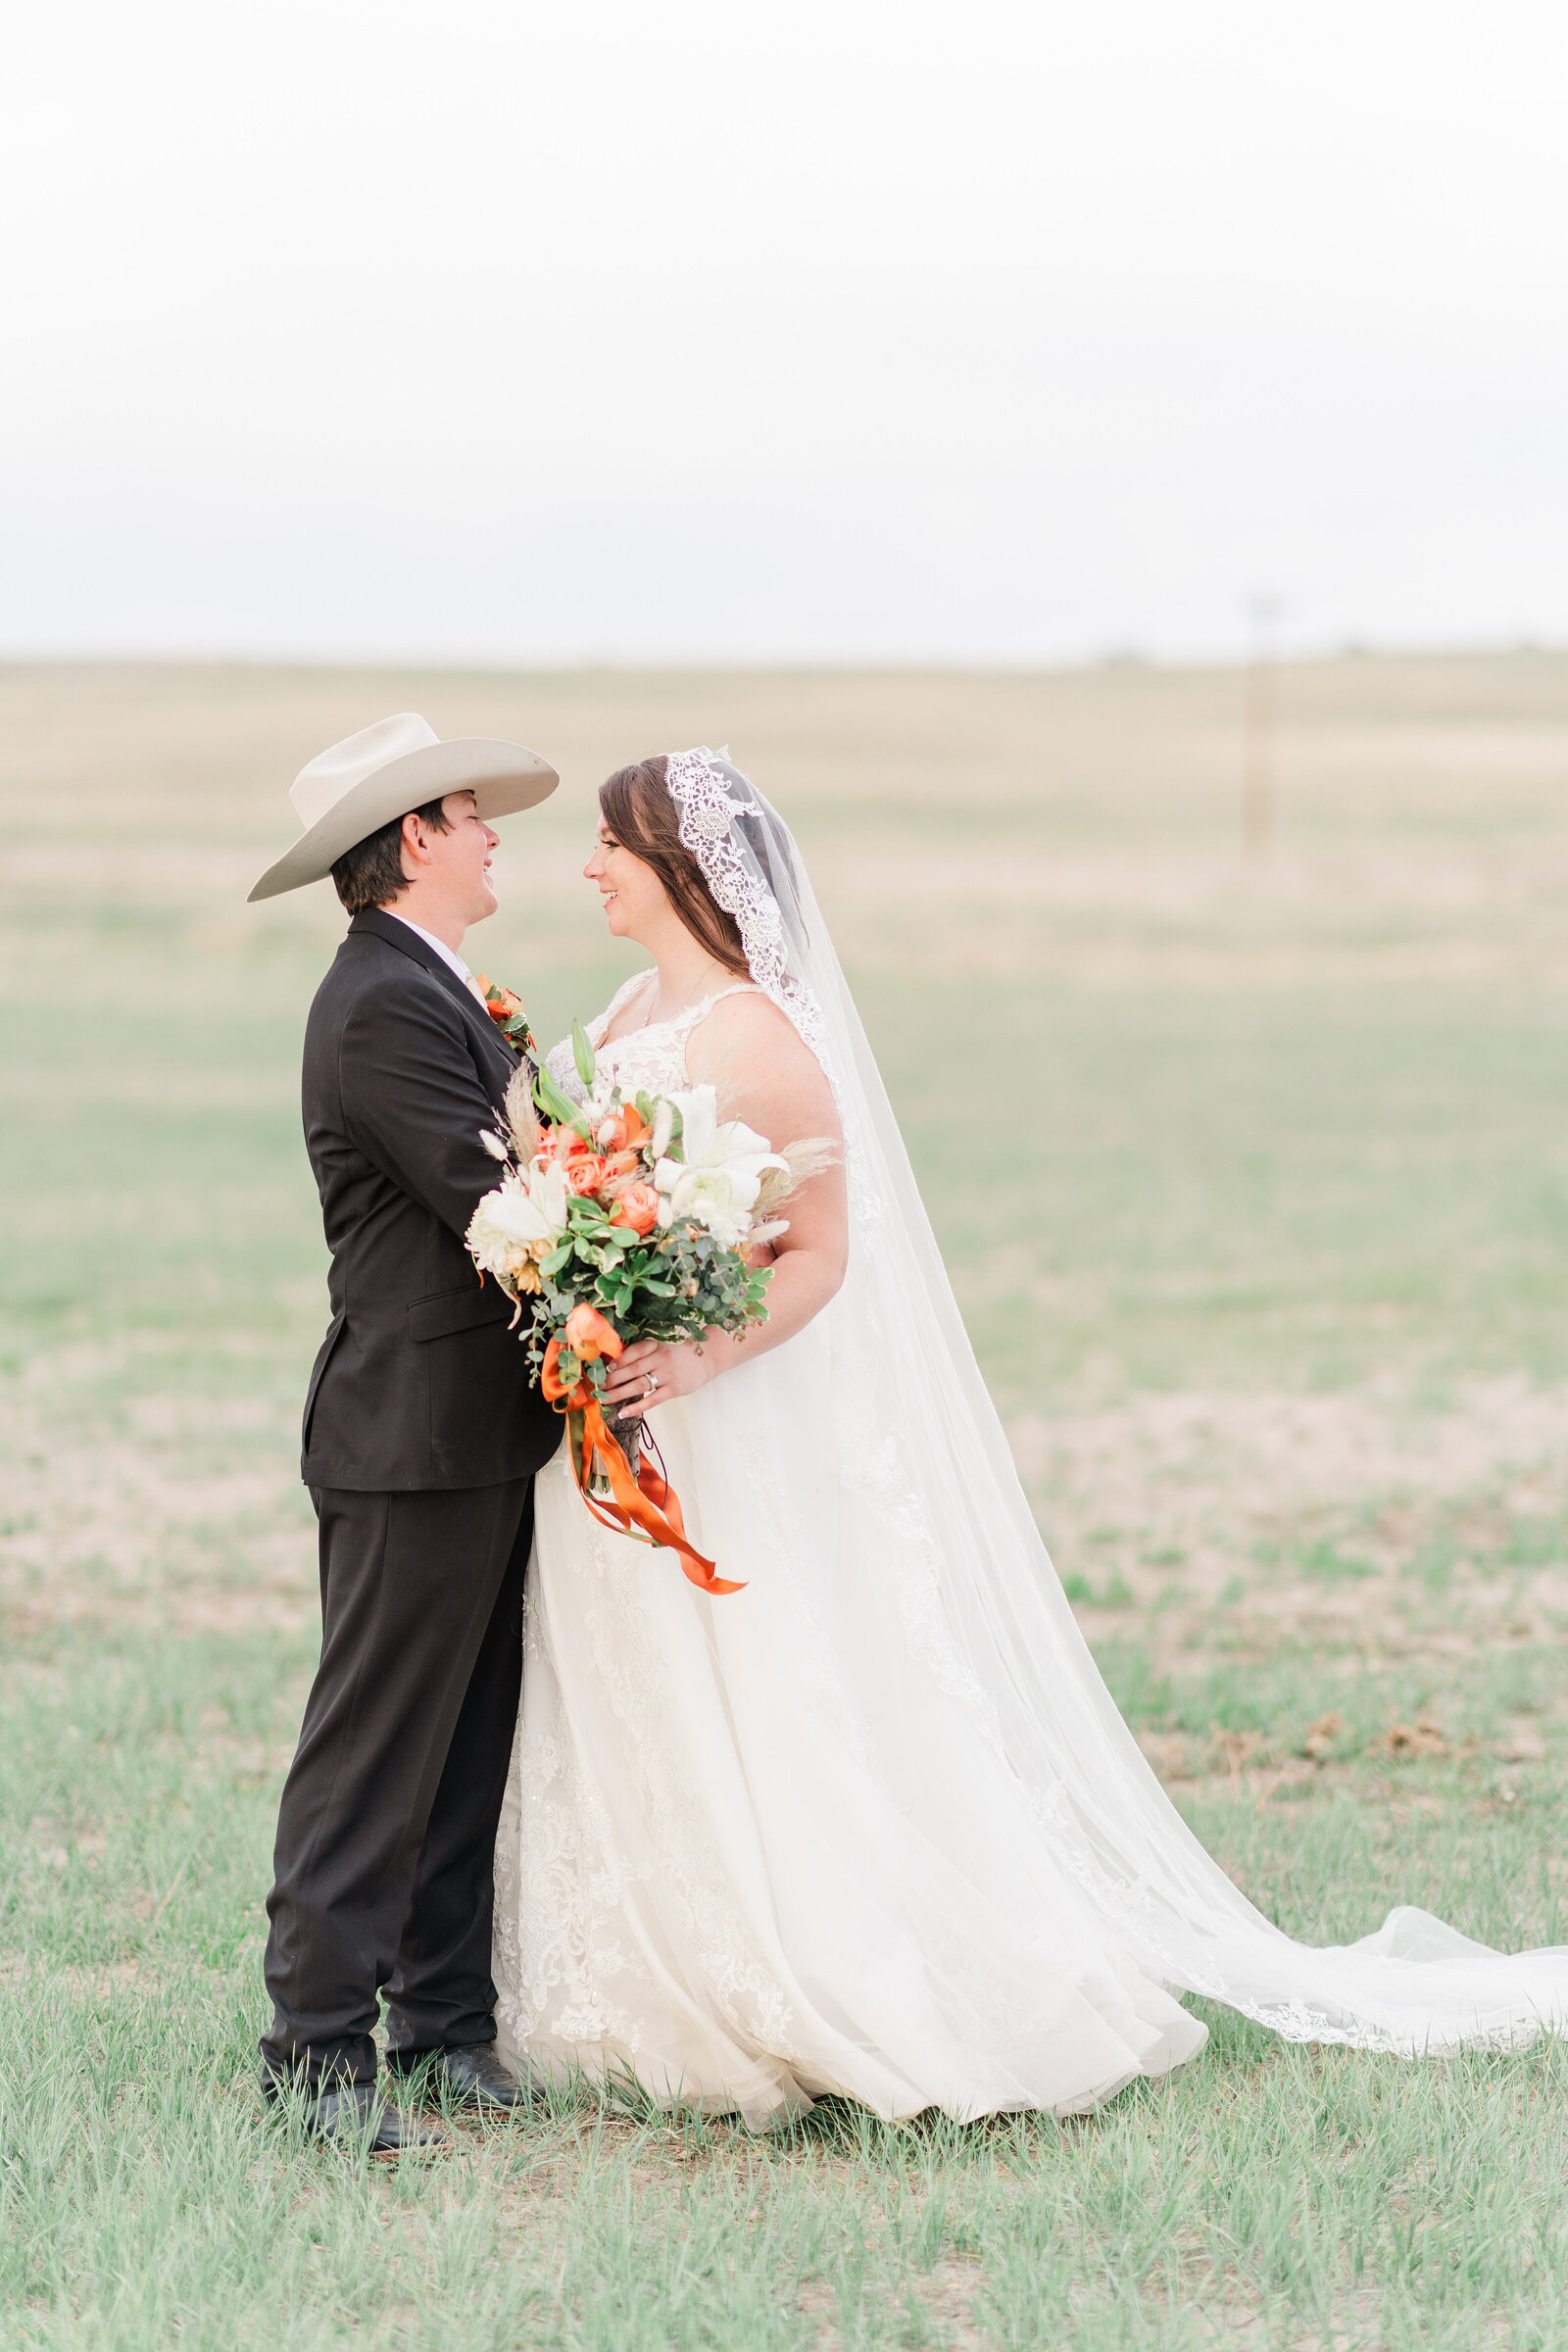 Hiking Elopement Photography in Colorado" - Combine adventure and romance with a hiking elopement and stunning photography to remember your special day.